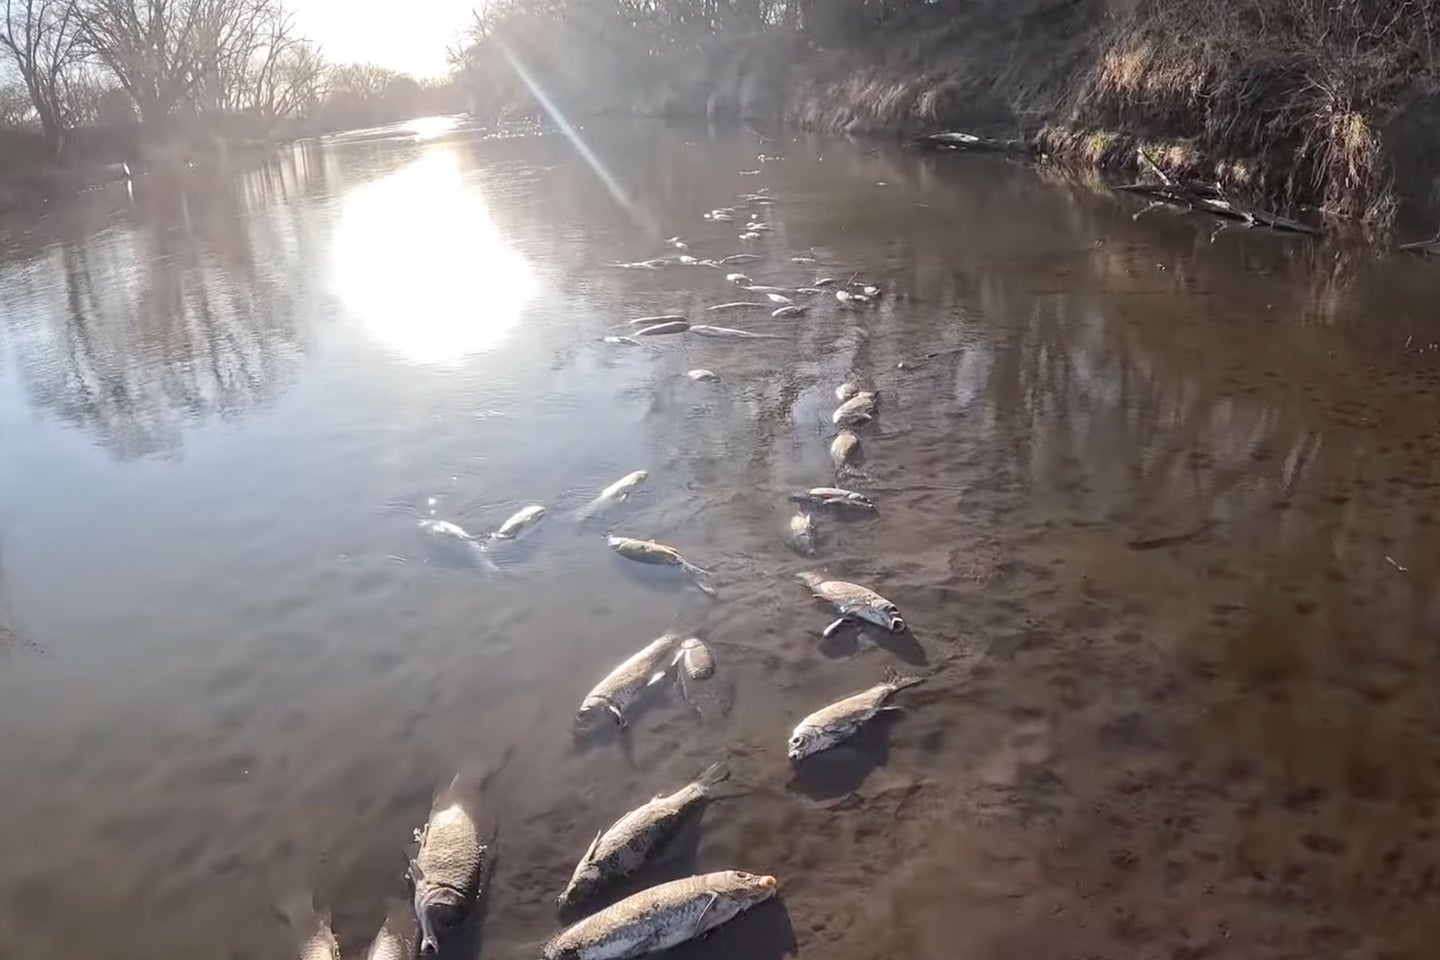 Hundreds of thousands of fish died after a fertilizer spill in Iowa.